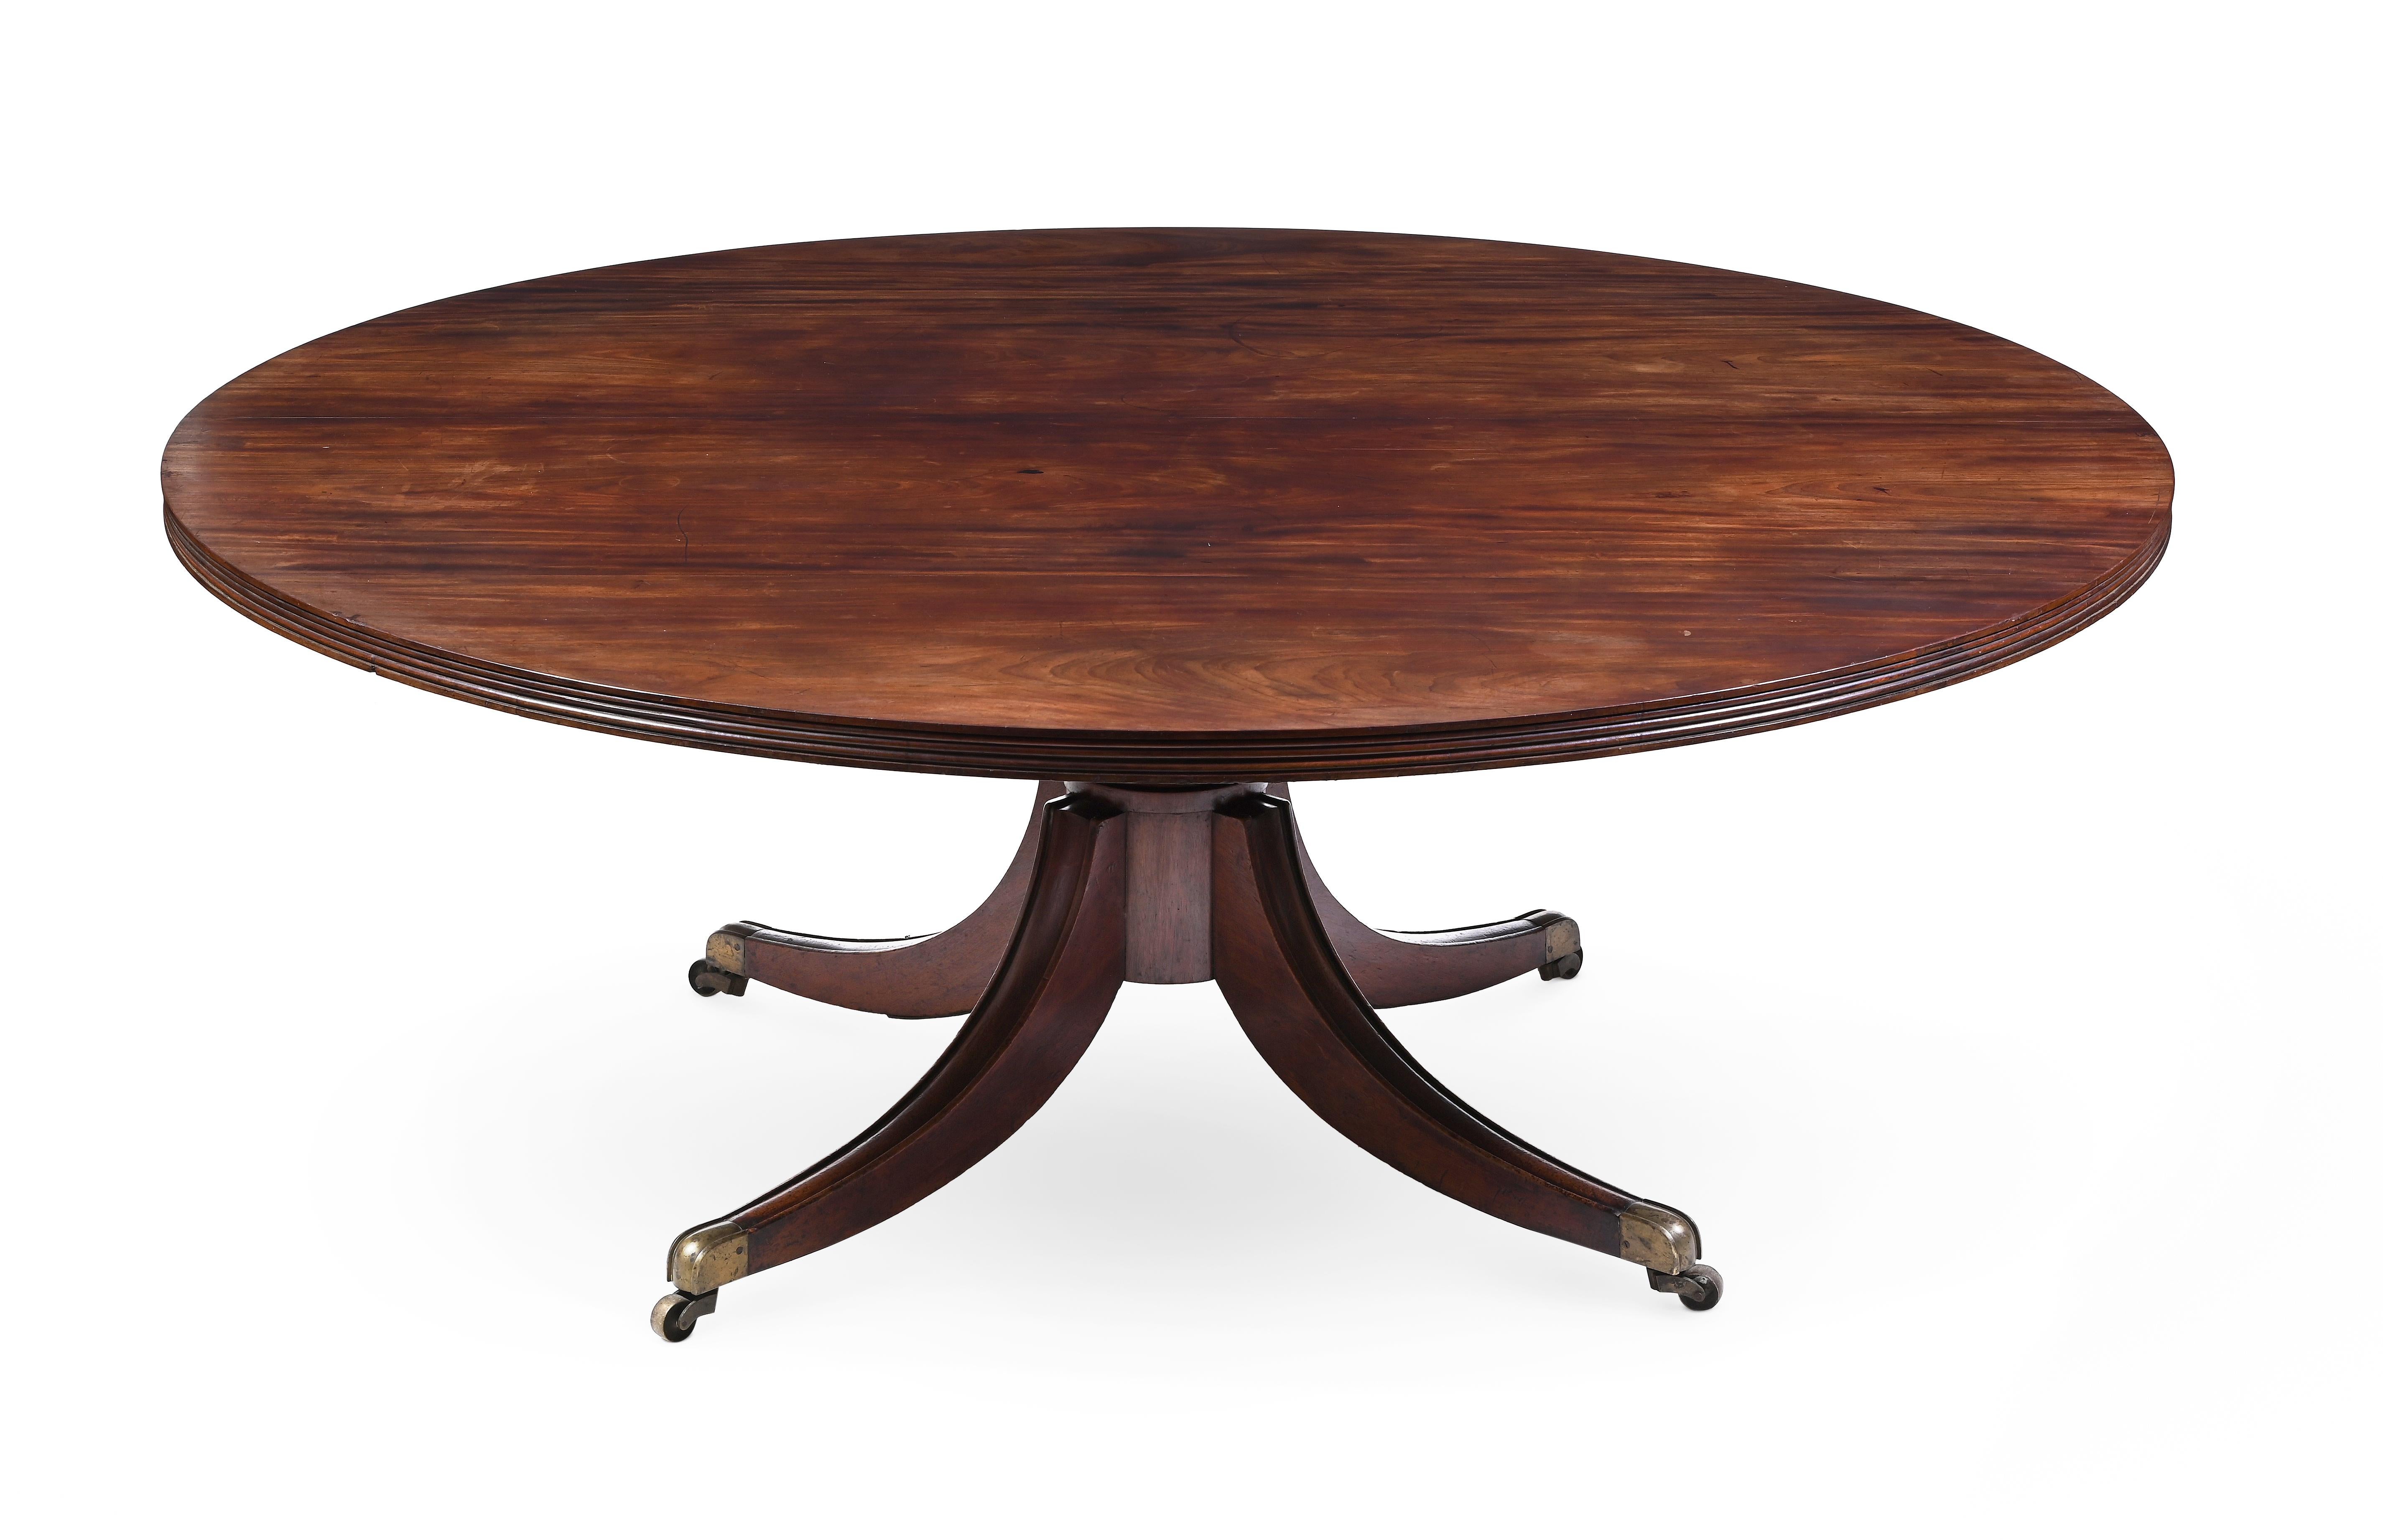 Turned A Large Irish Regency Mahogany Round Dining Table For Sale